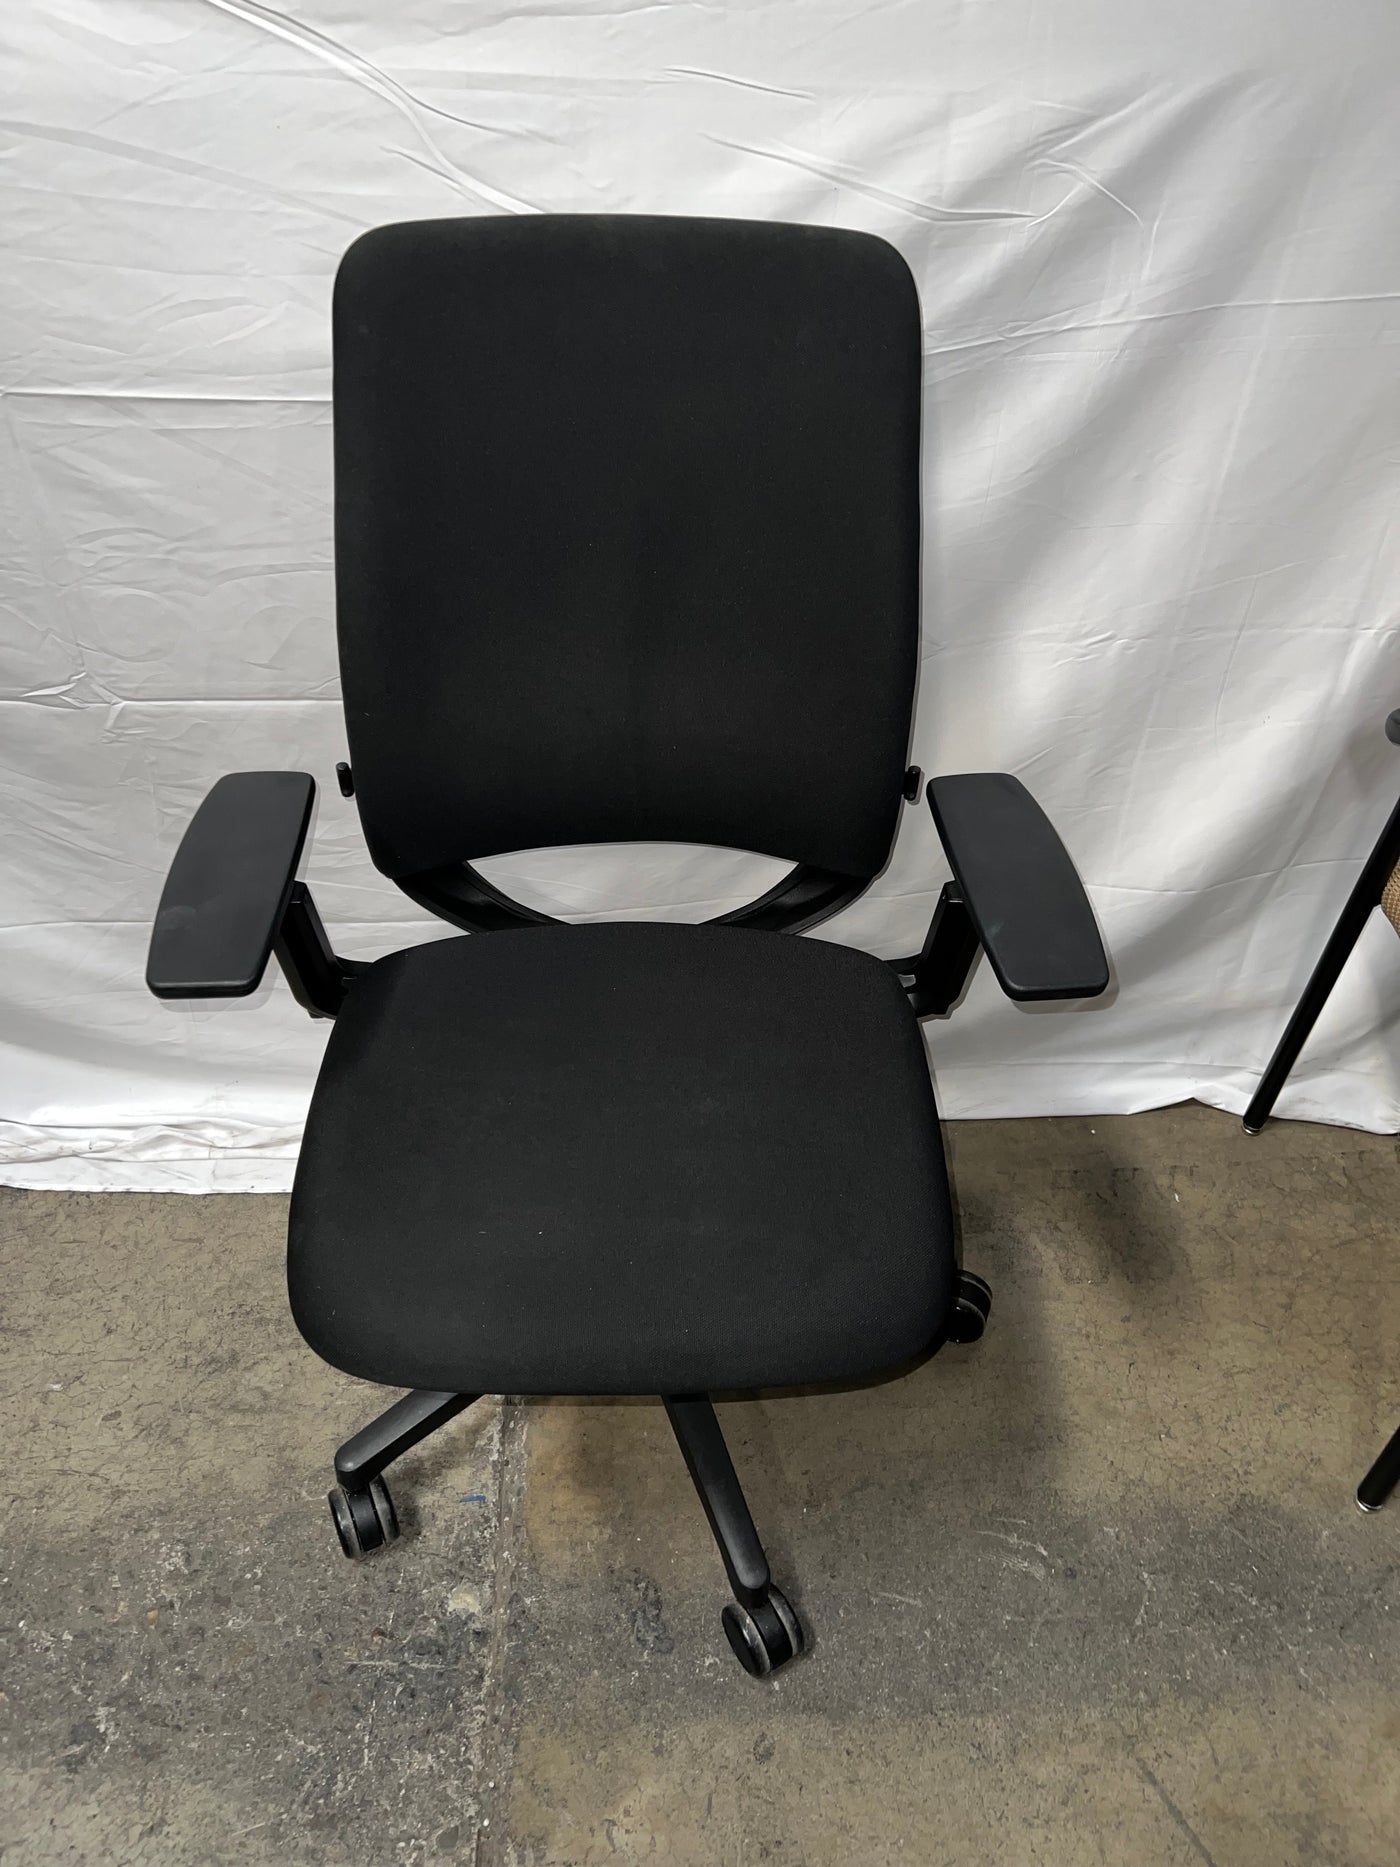 PRE-OWNED STEELCASE AMIA